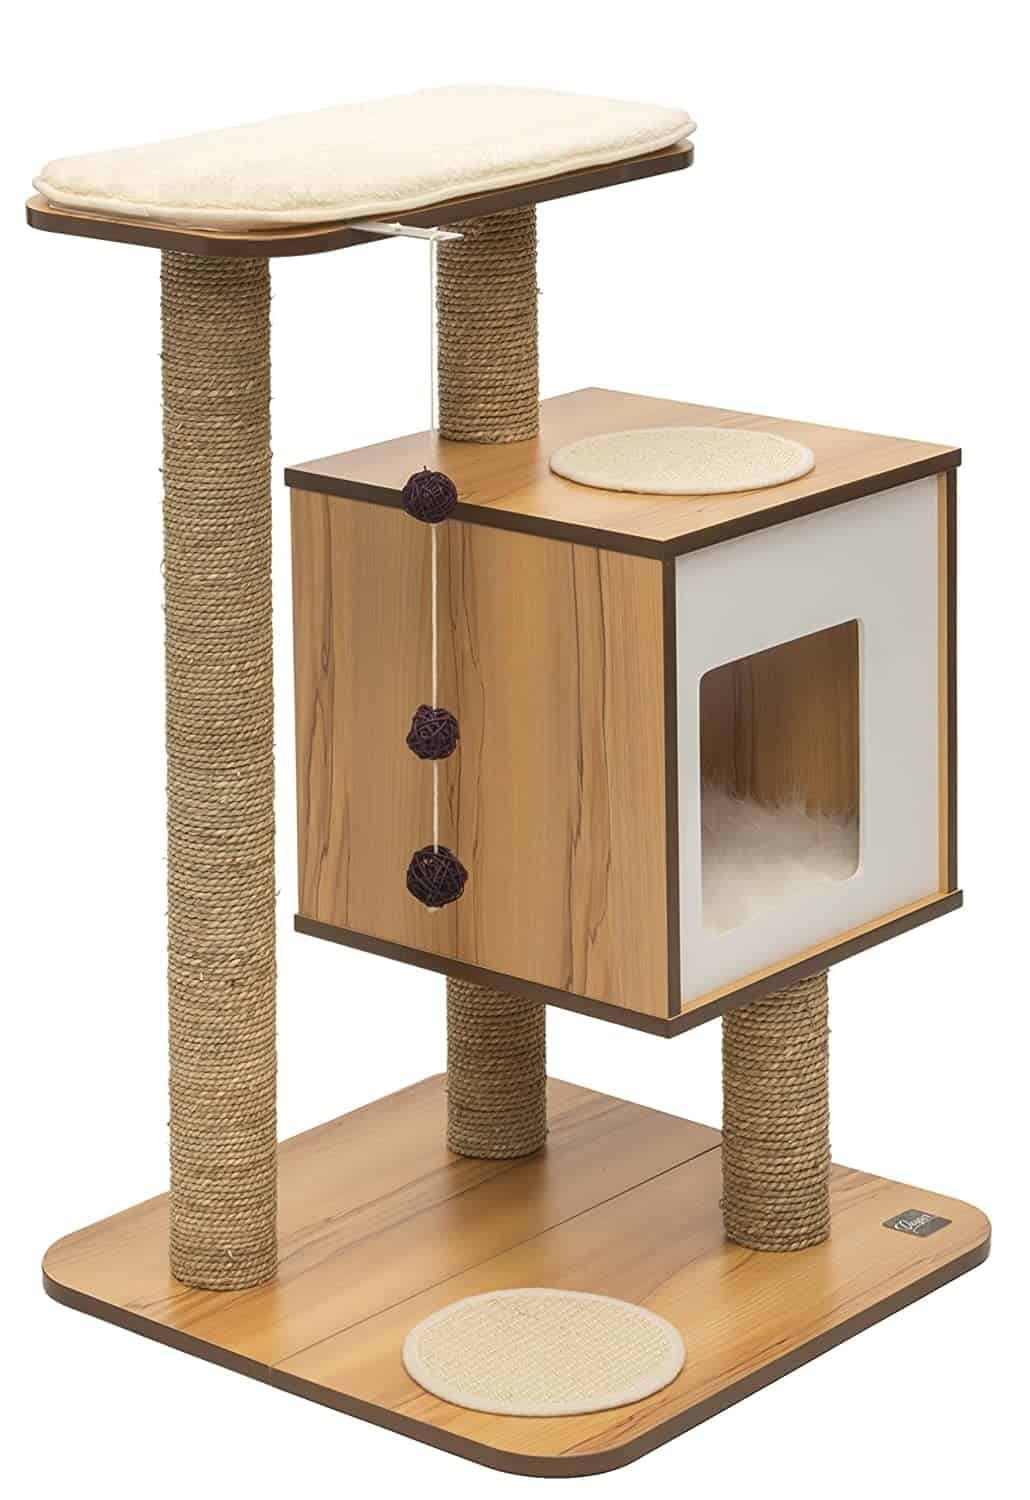 Diy Cat Tree Made Out Of Dresser